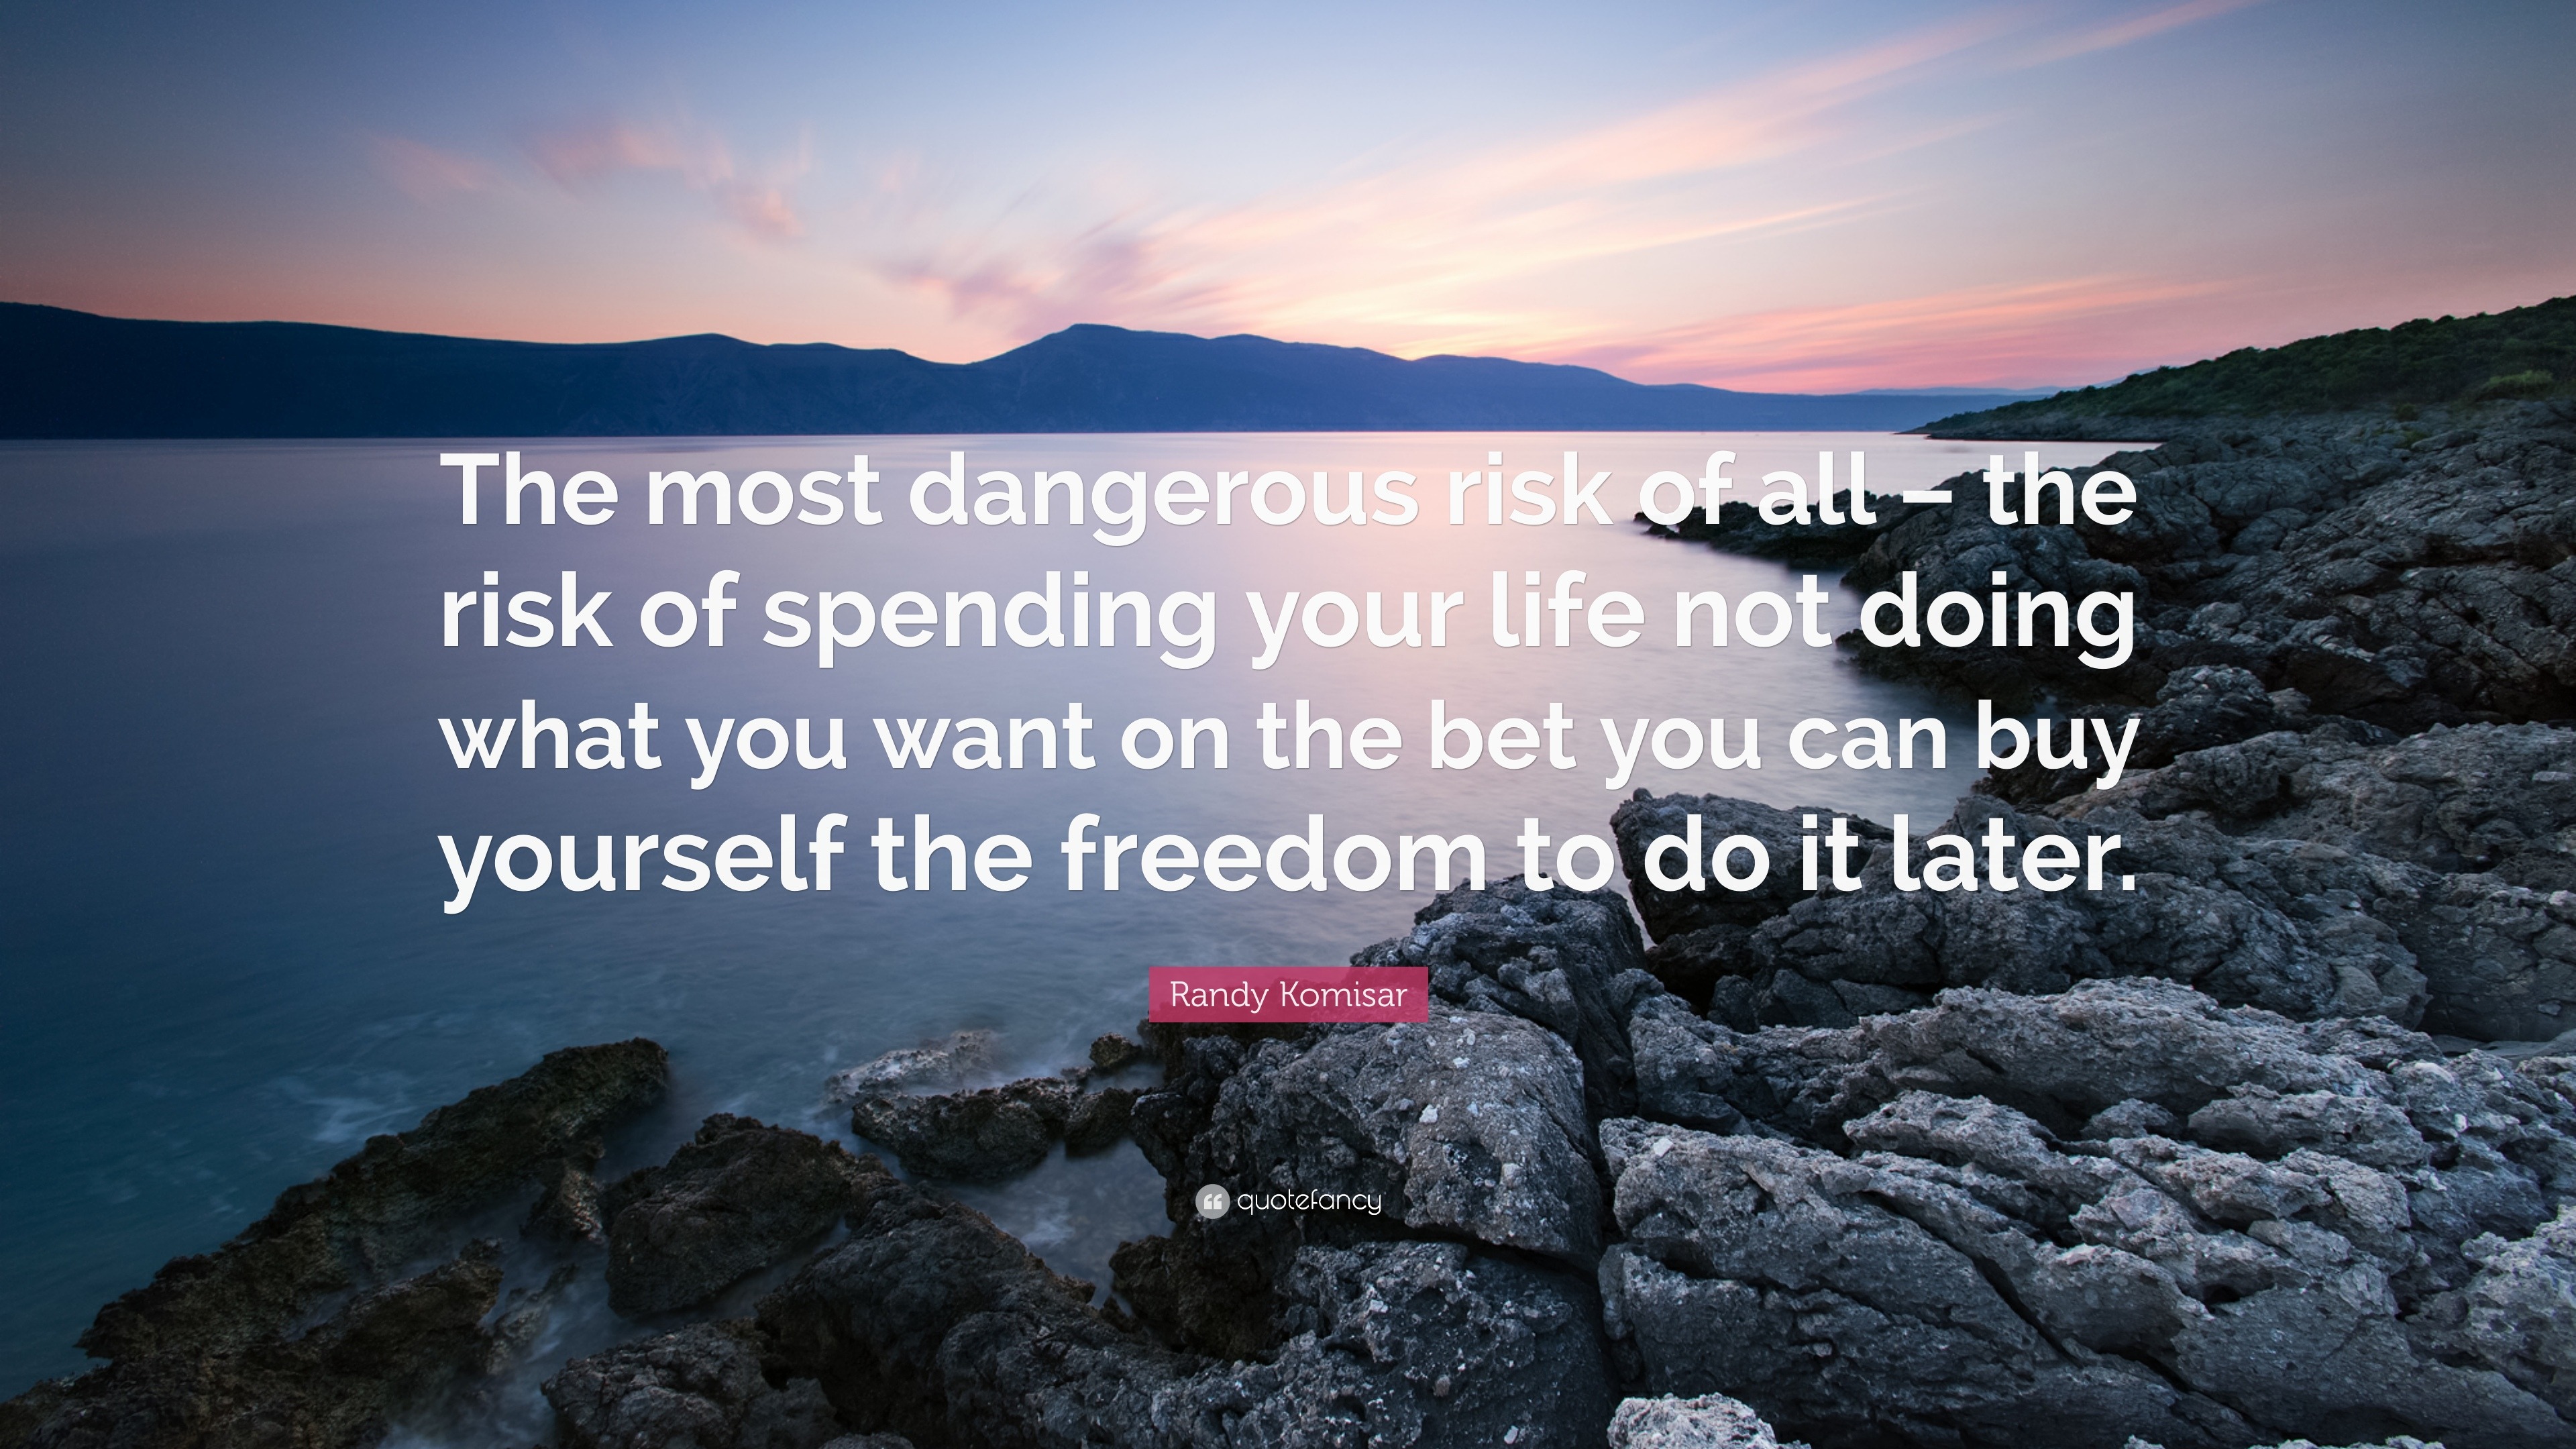 Randy Komisar Quote “The most dangerous risk of all – the risk of spending